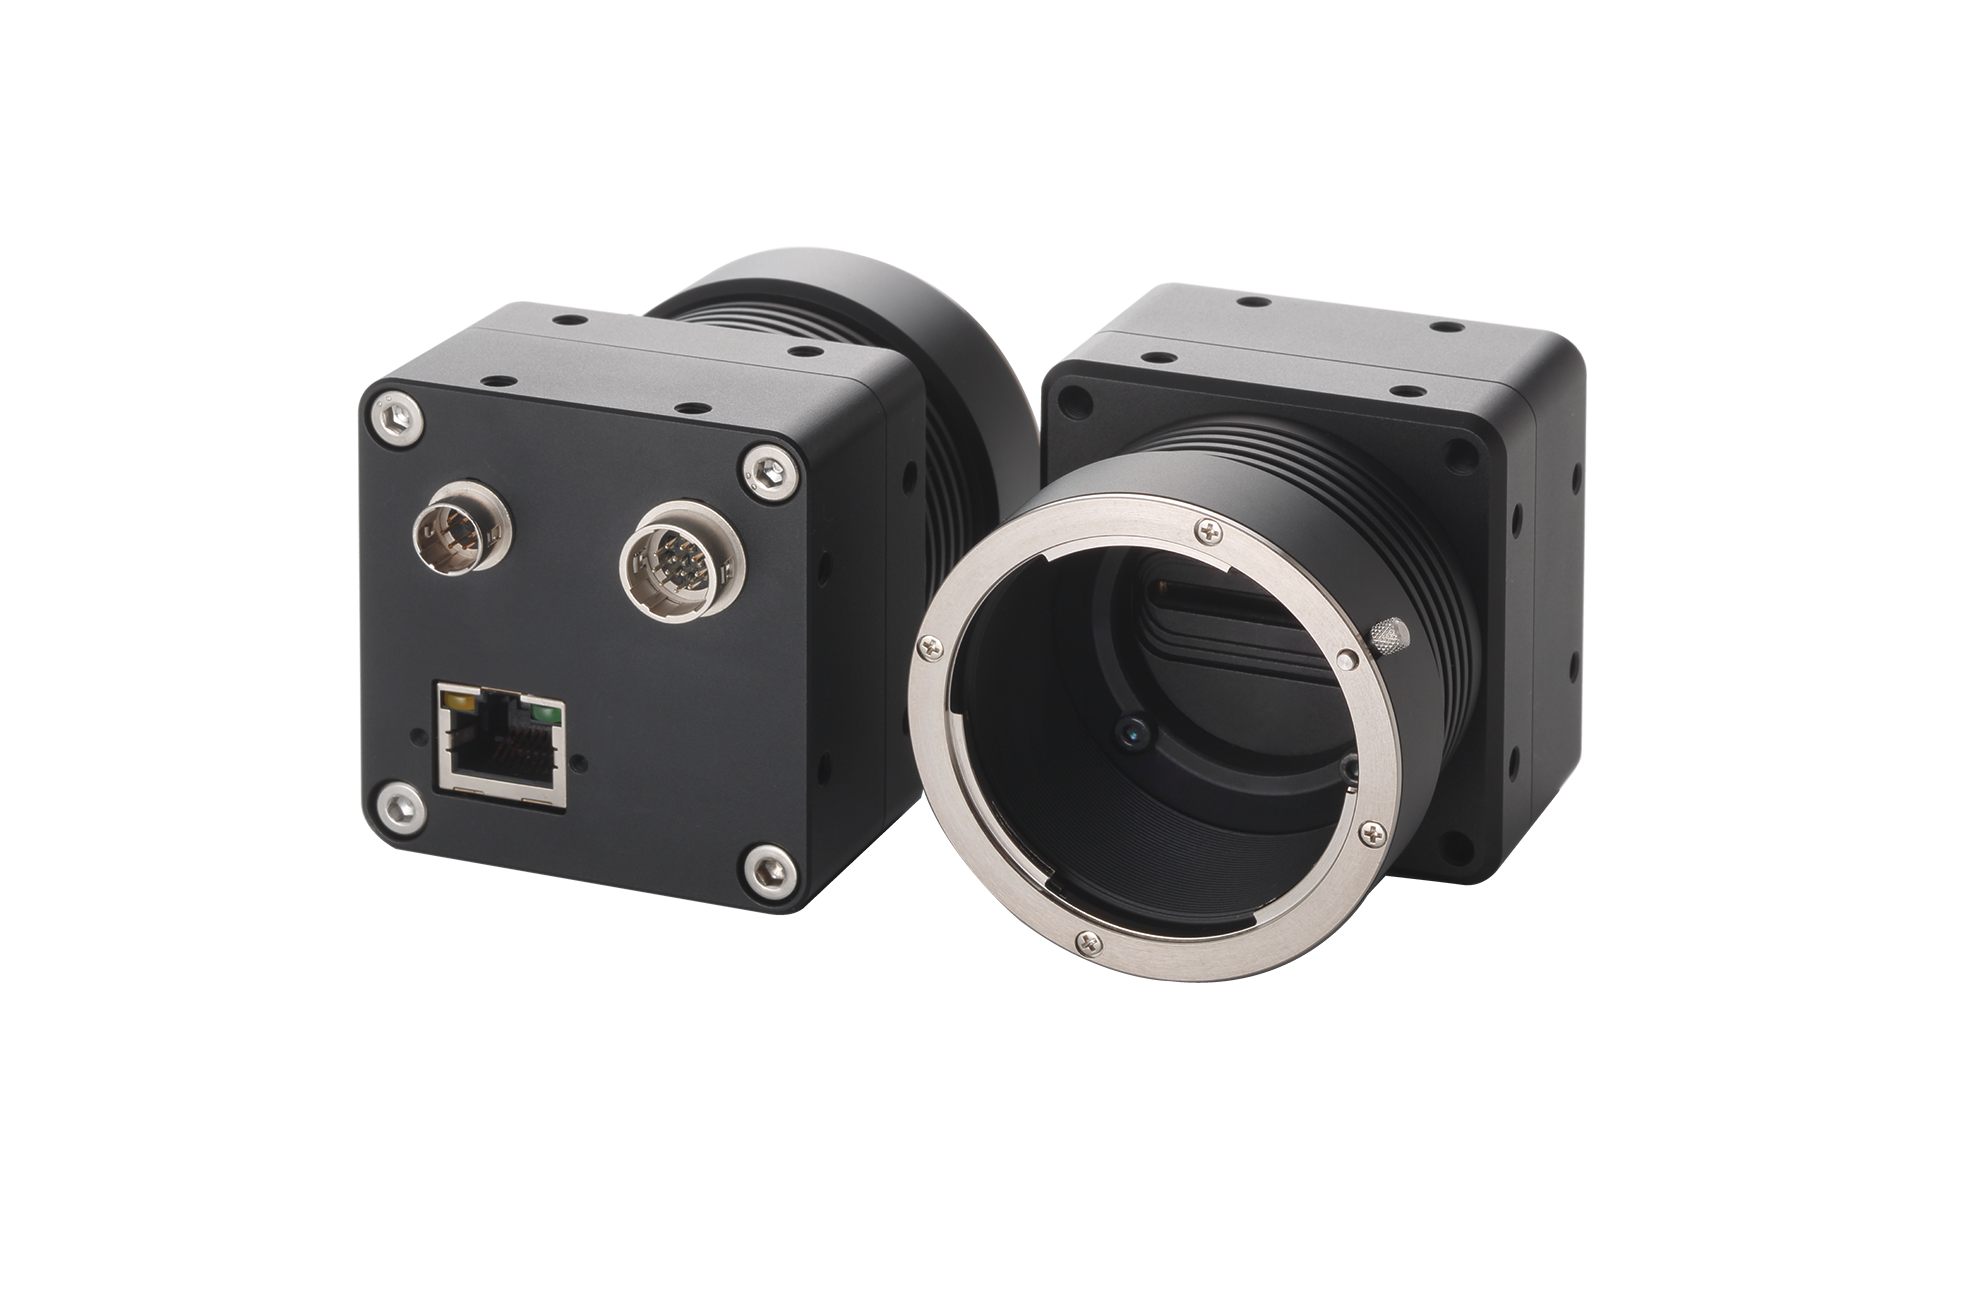 Line Scan Cameras Feature Power over Ethernet Functionality